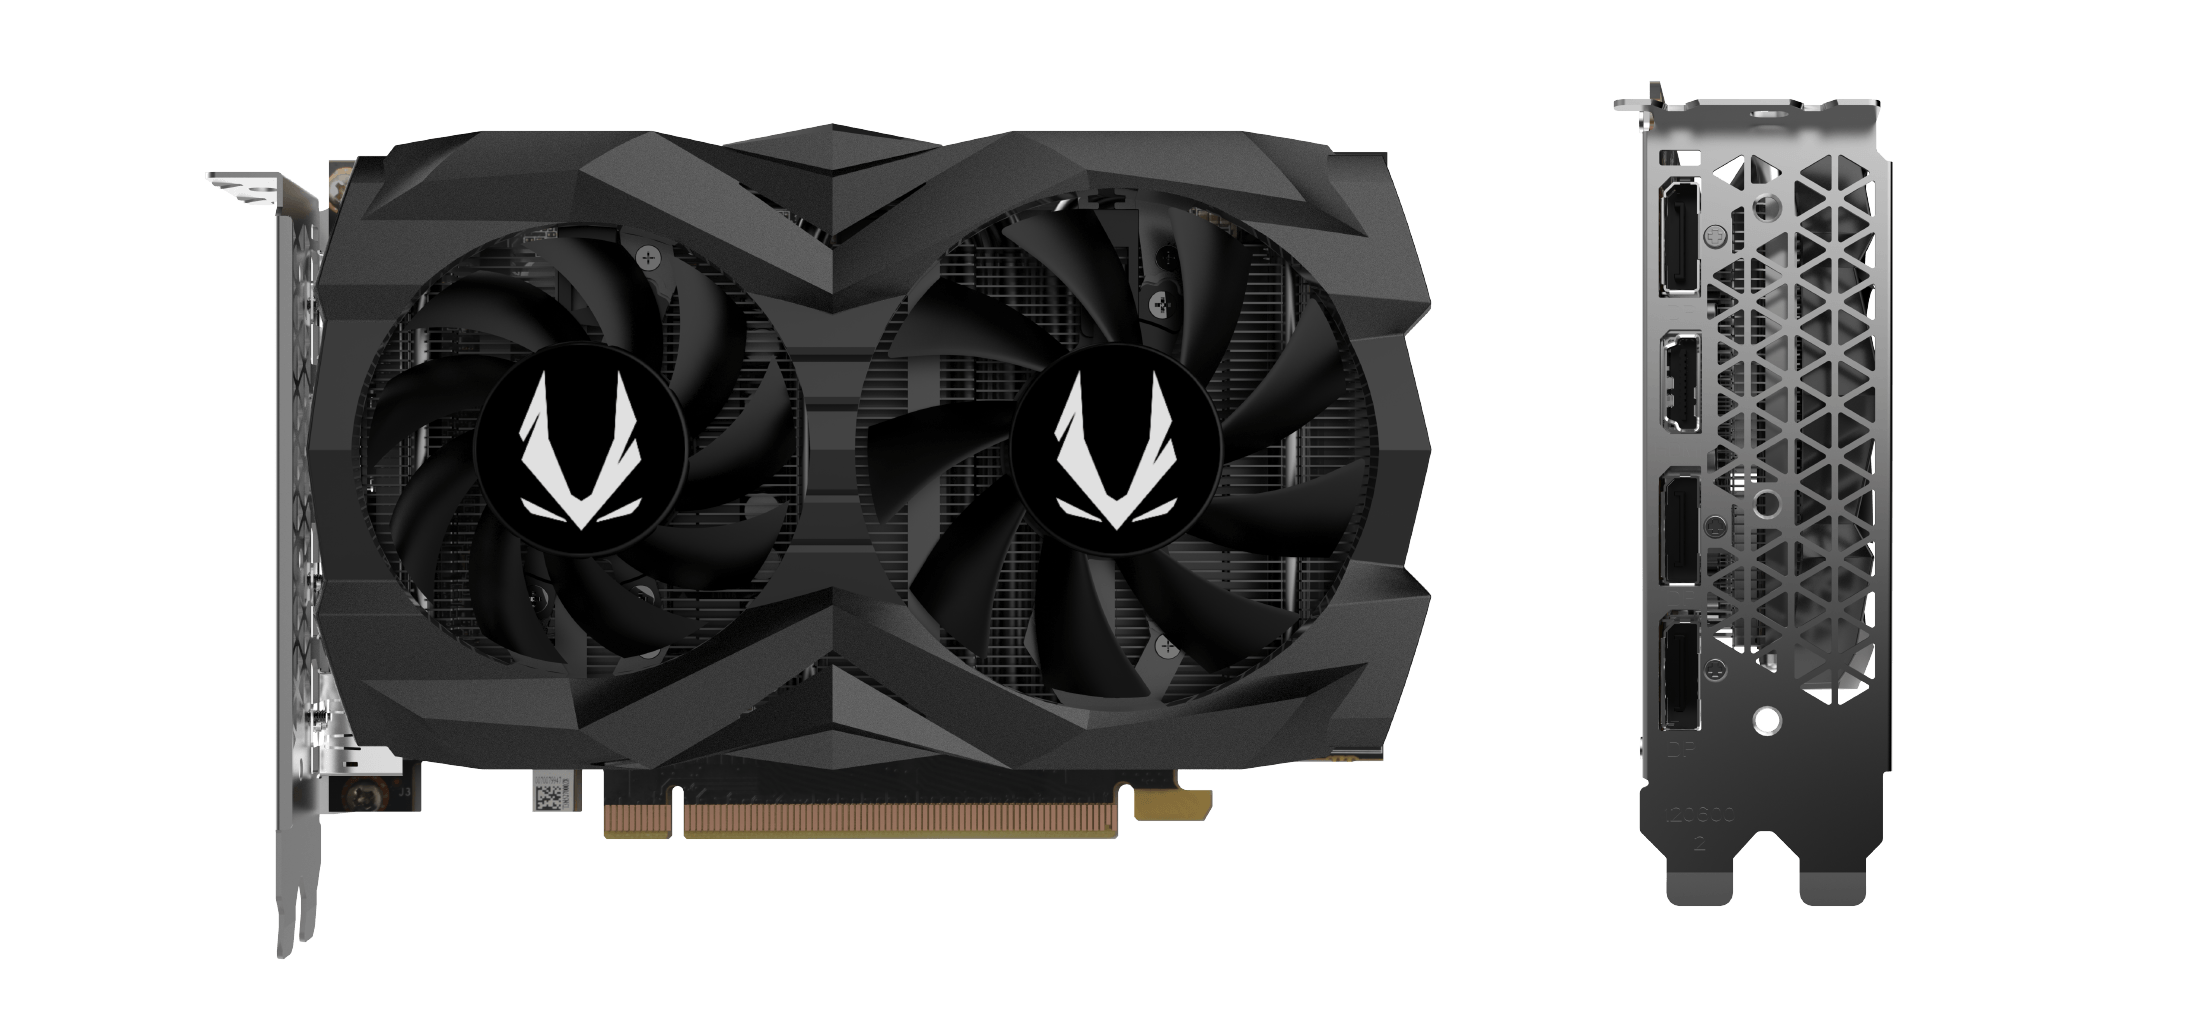 ZOTAC Expands the GeForce GTX Series with 1660 Graphics Cards | ZOTAC